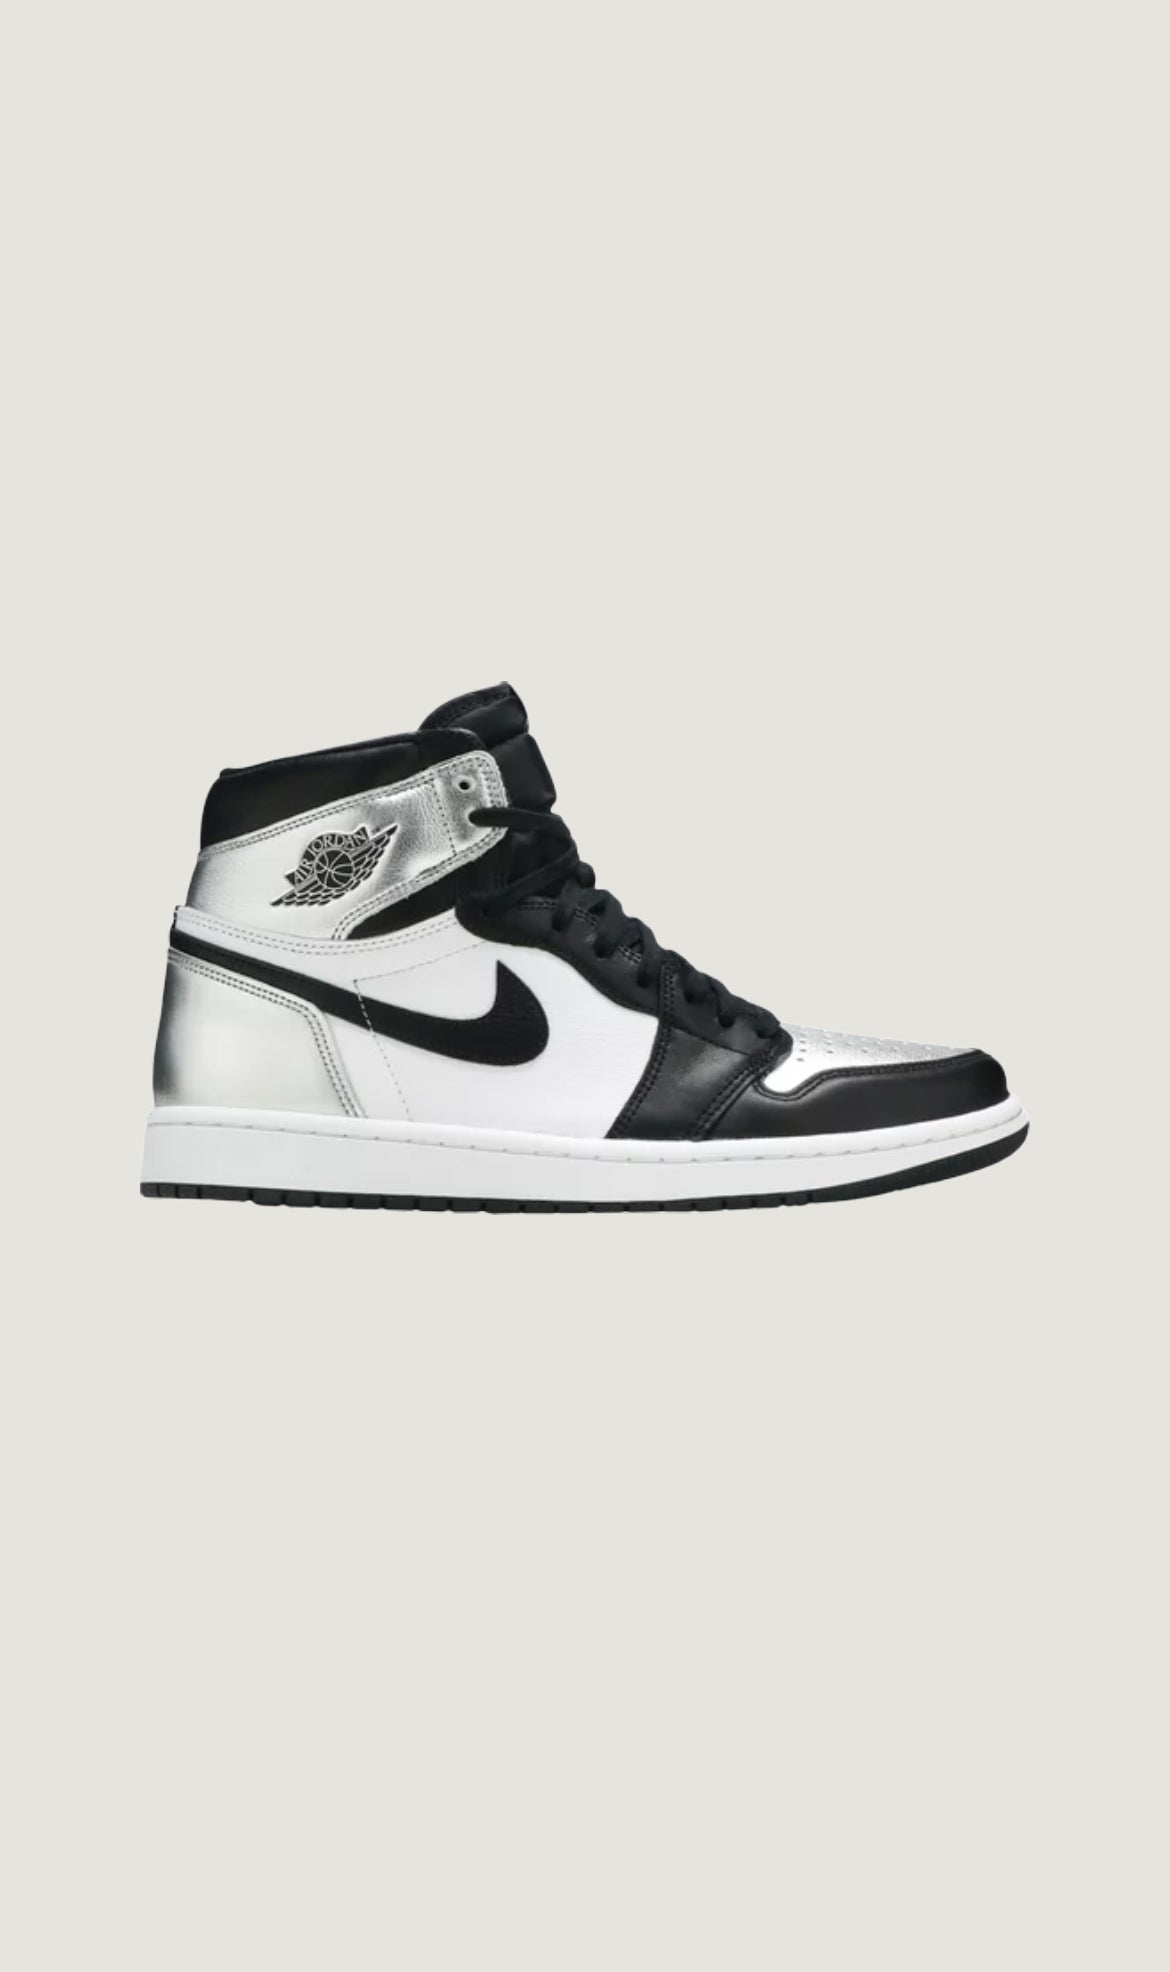 Load image into Gallery viewer, WMNS AIR JORDAN 1 RETRO HIGH OG - SILVER TOE
